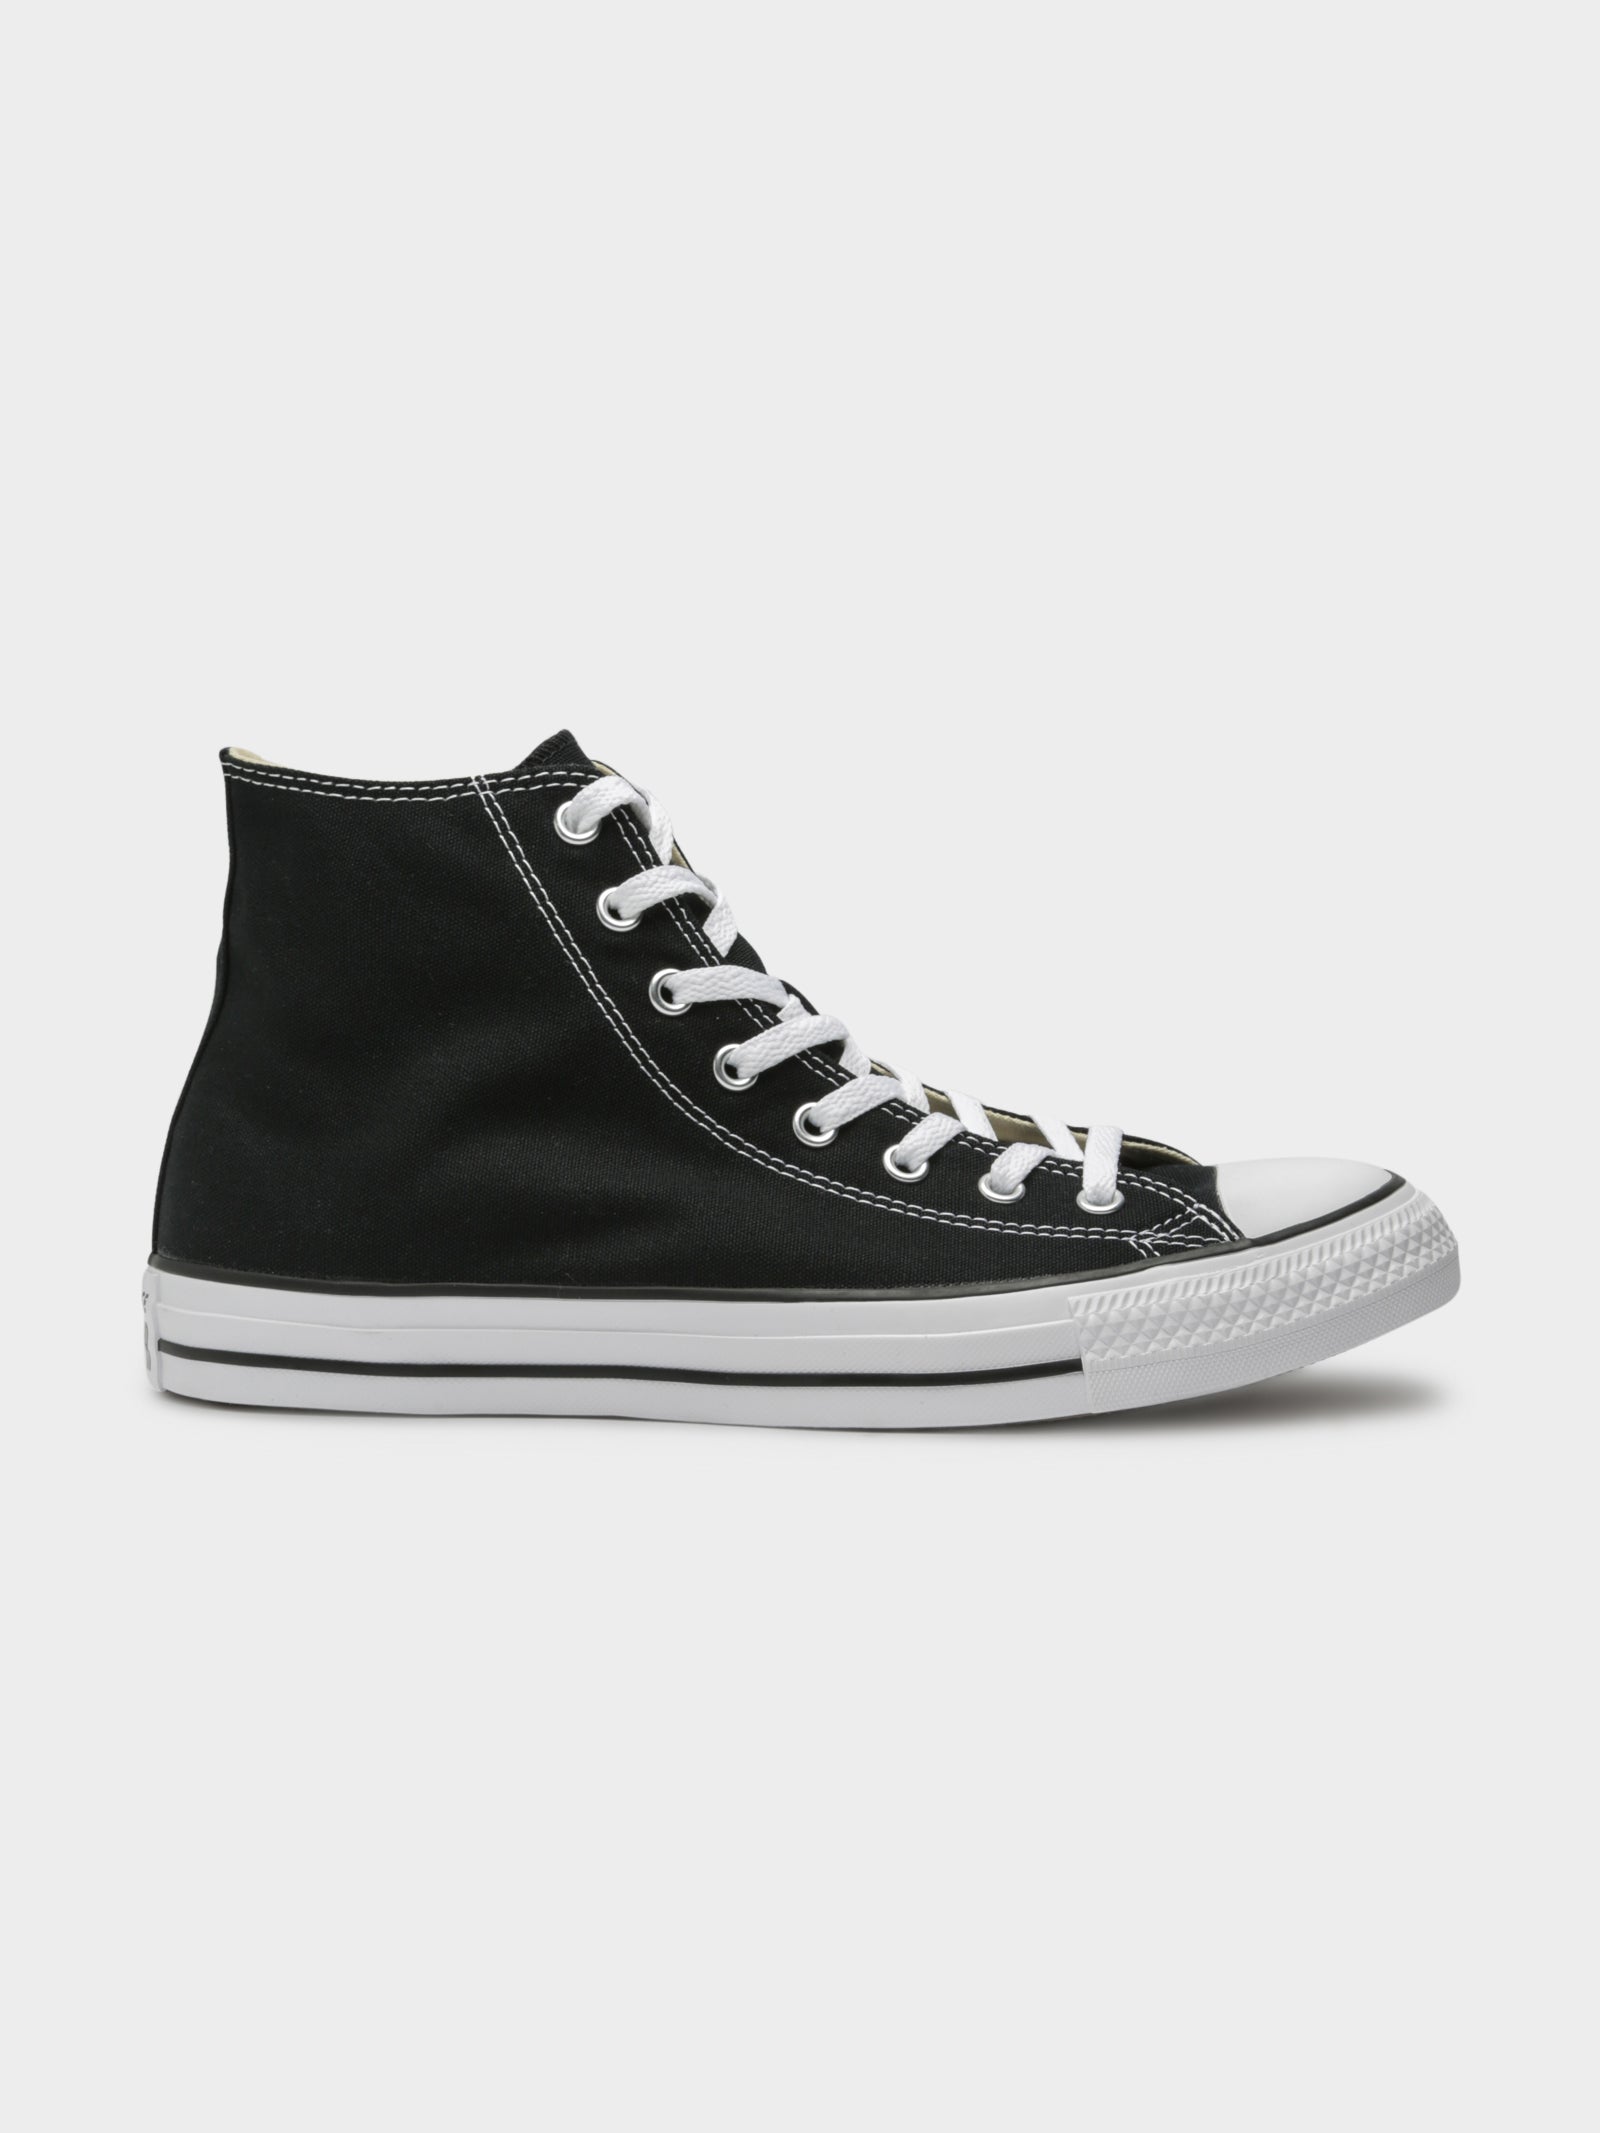 converse high top shoes womens